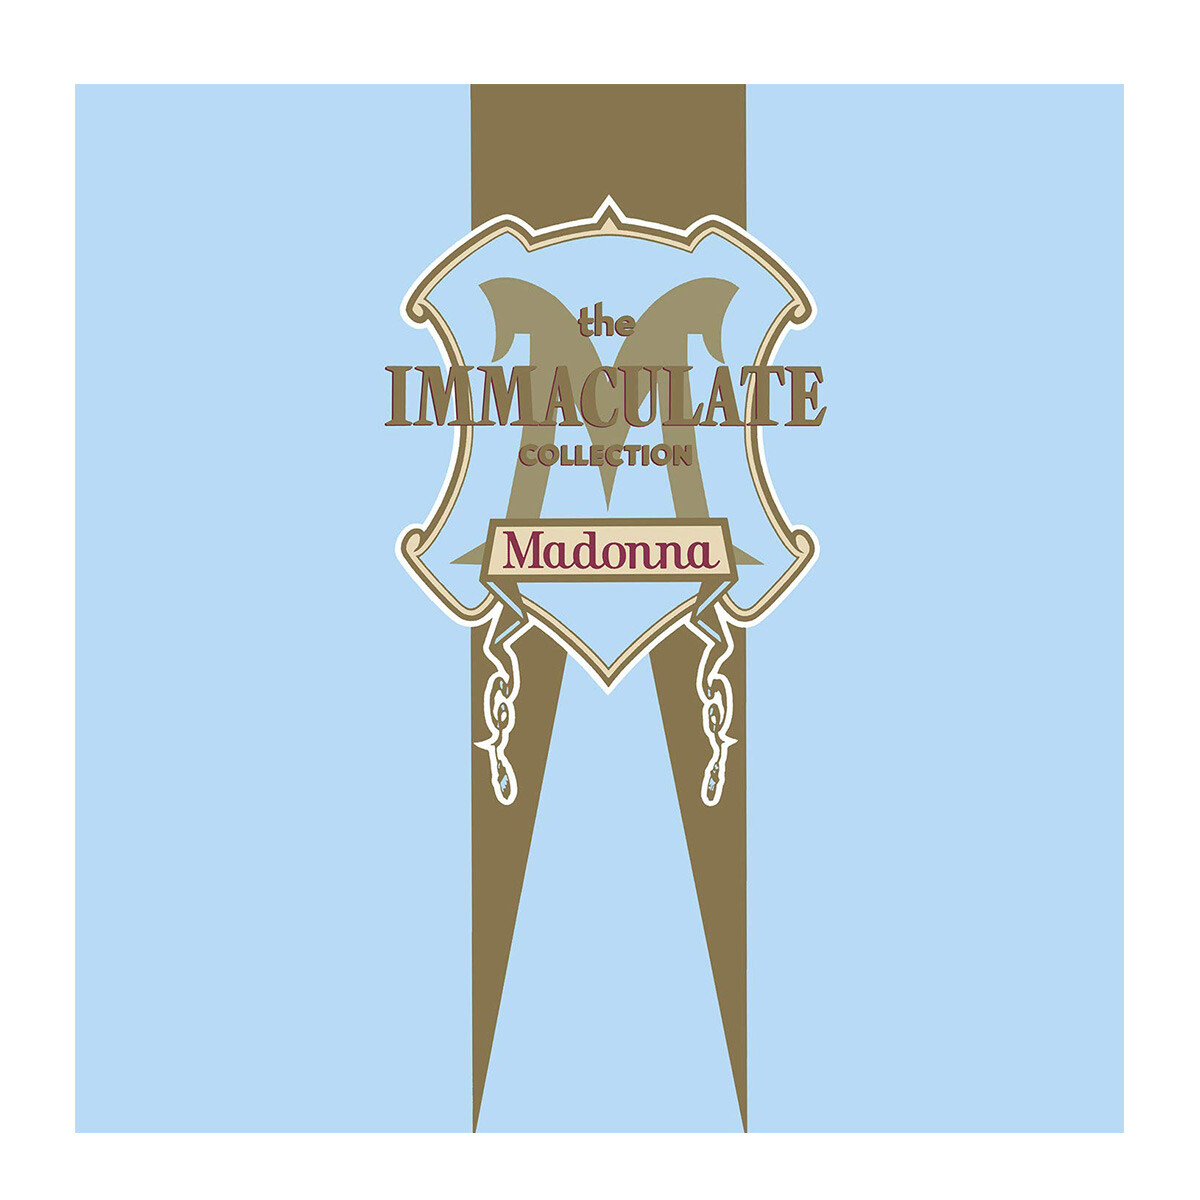 (c) Madonna - The Inmaculate Collection (arg) - Cd 